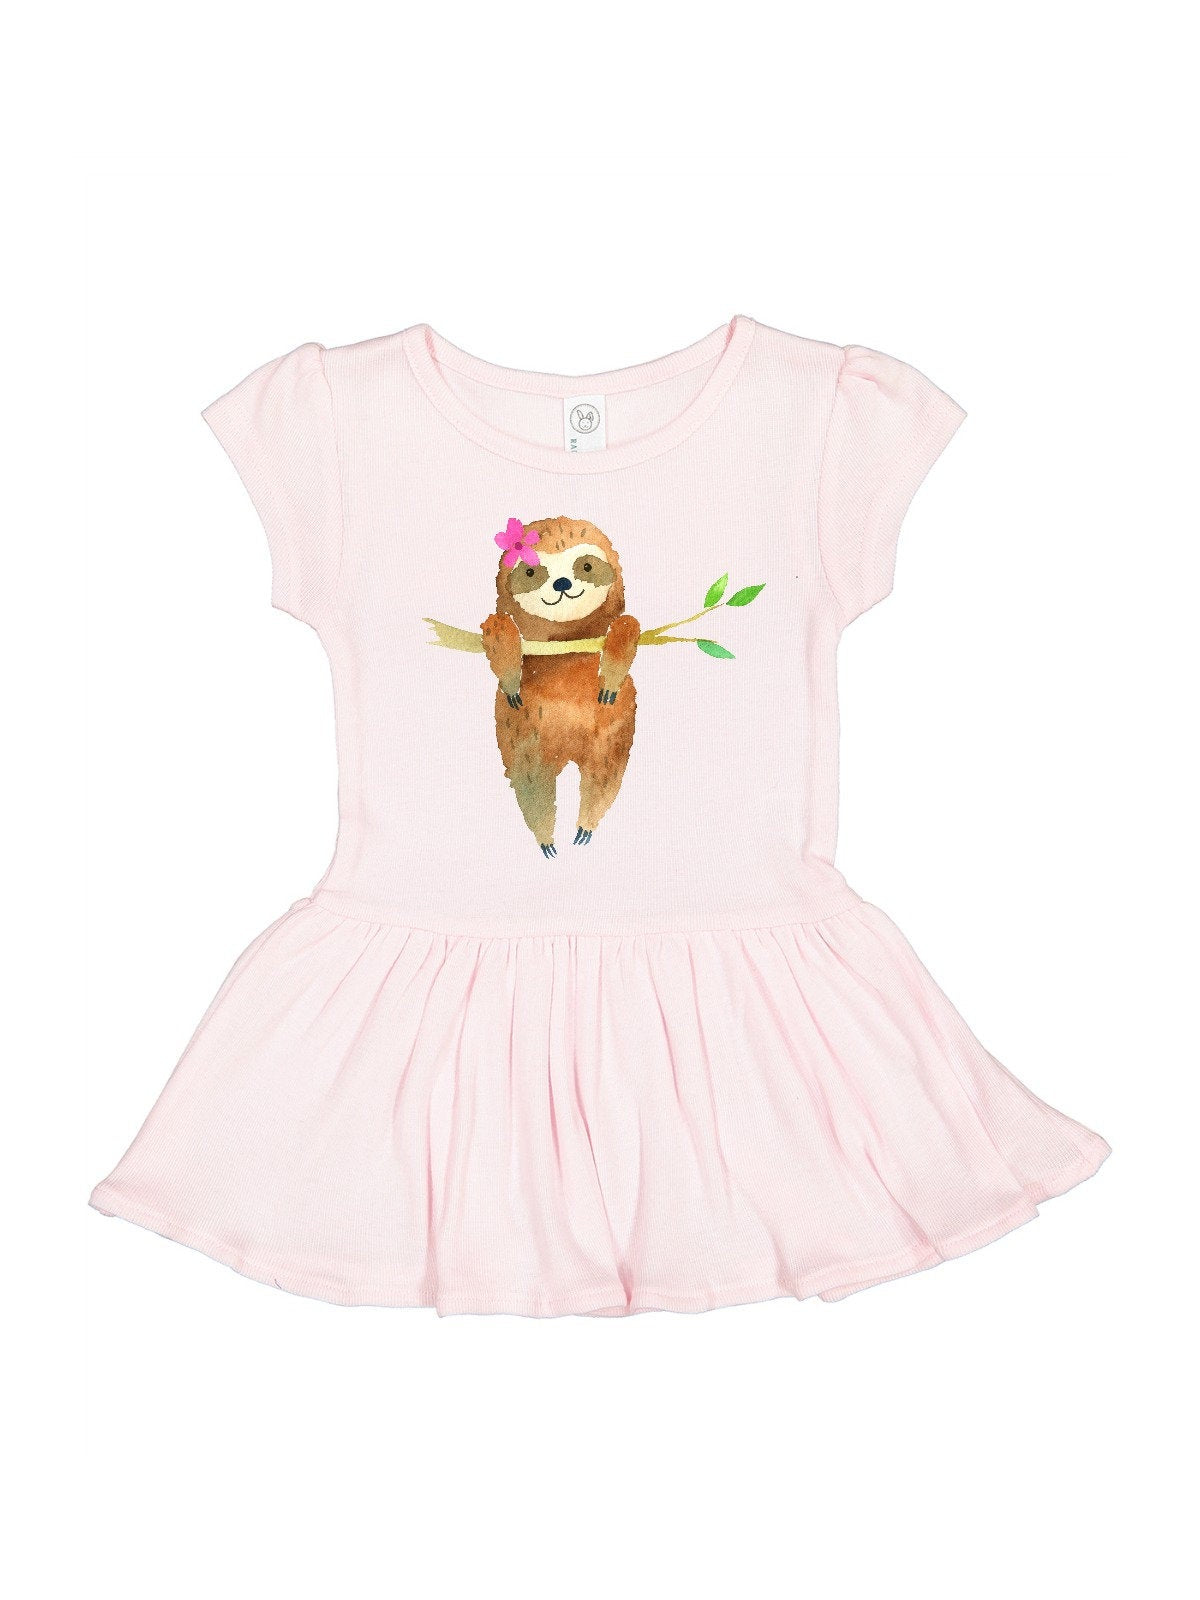 girls black dress with sleeping sloth and pink flower